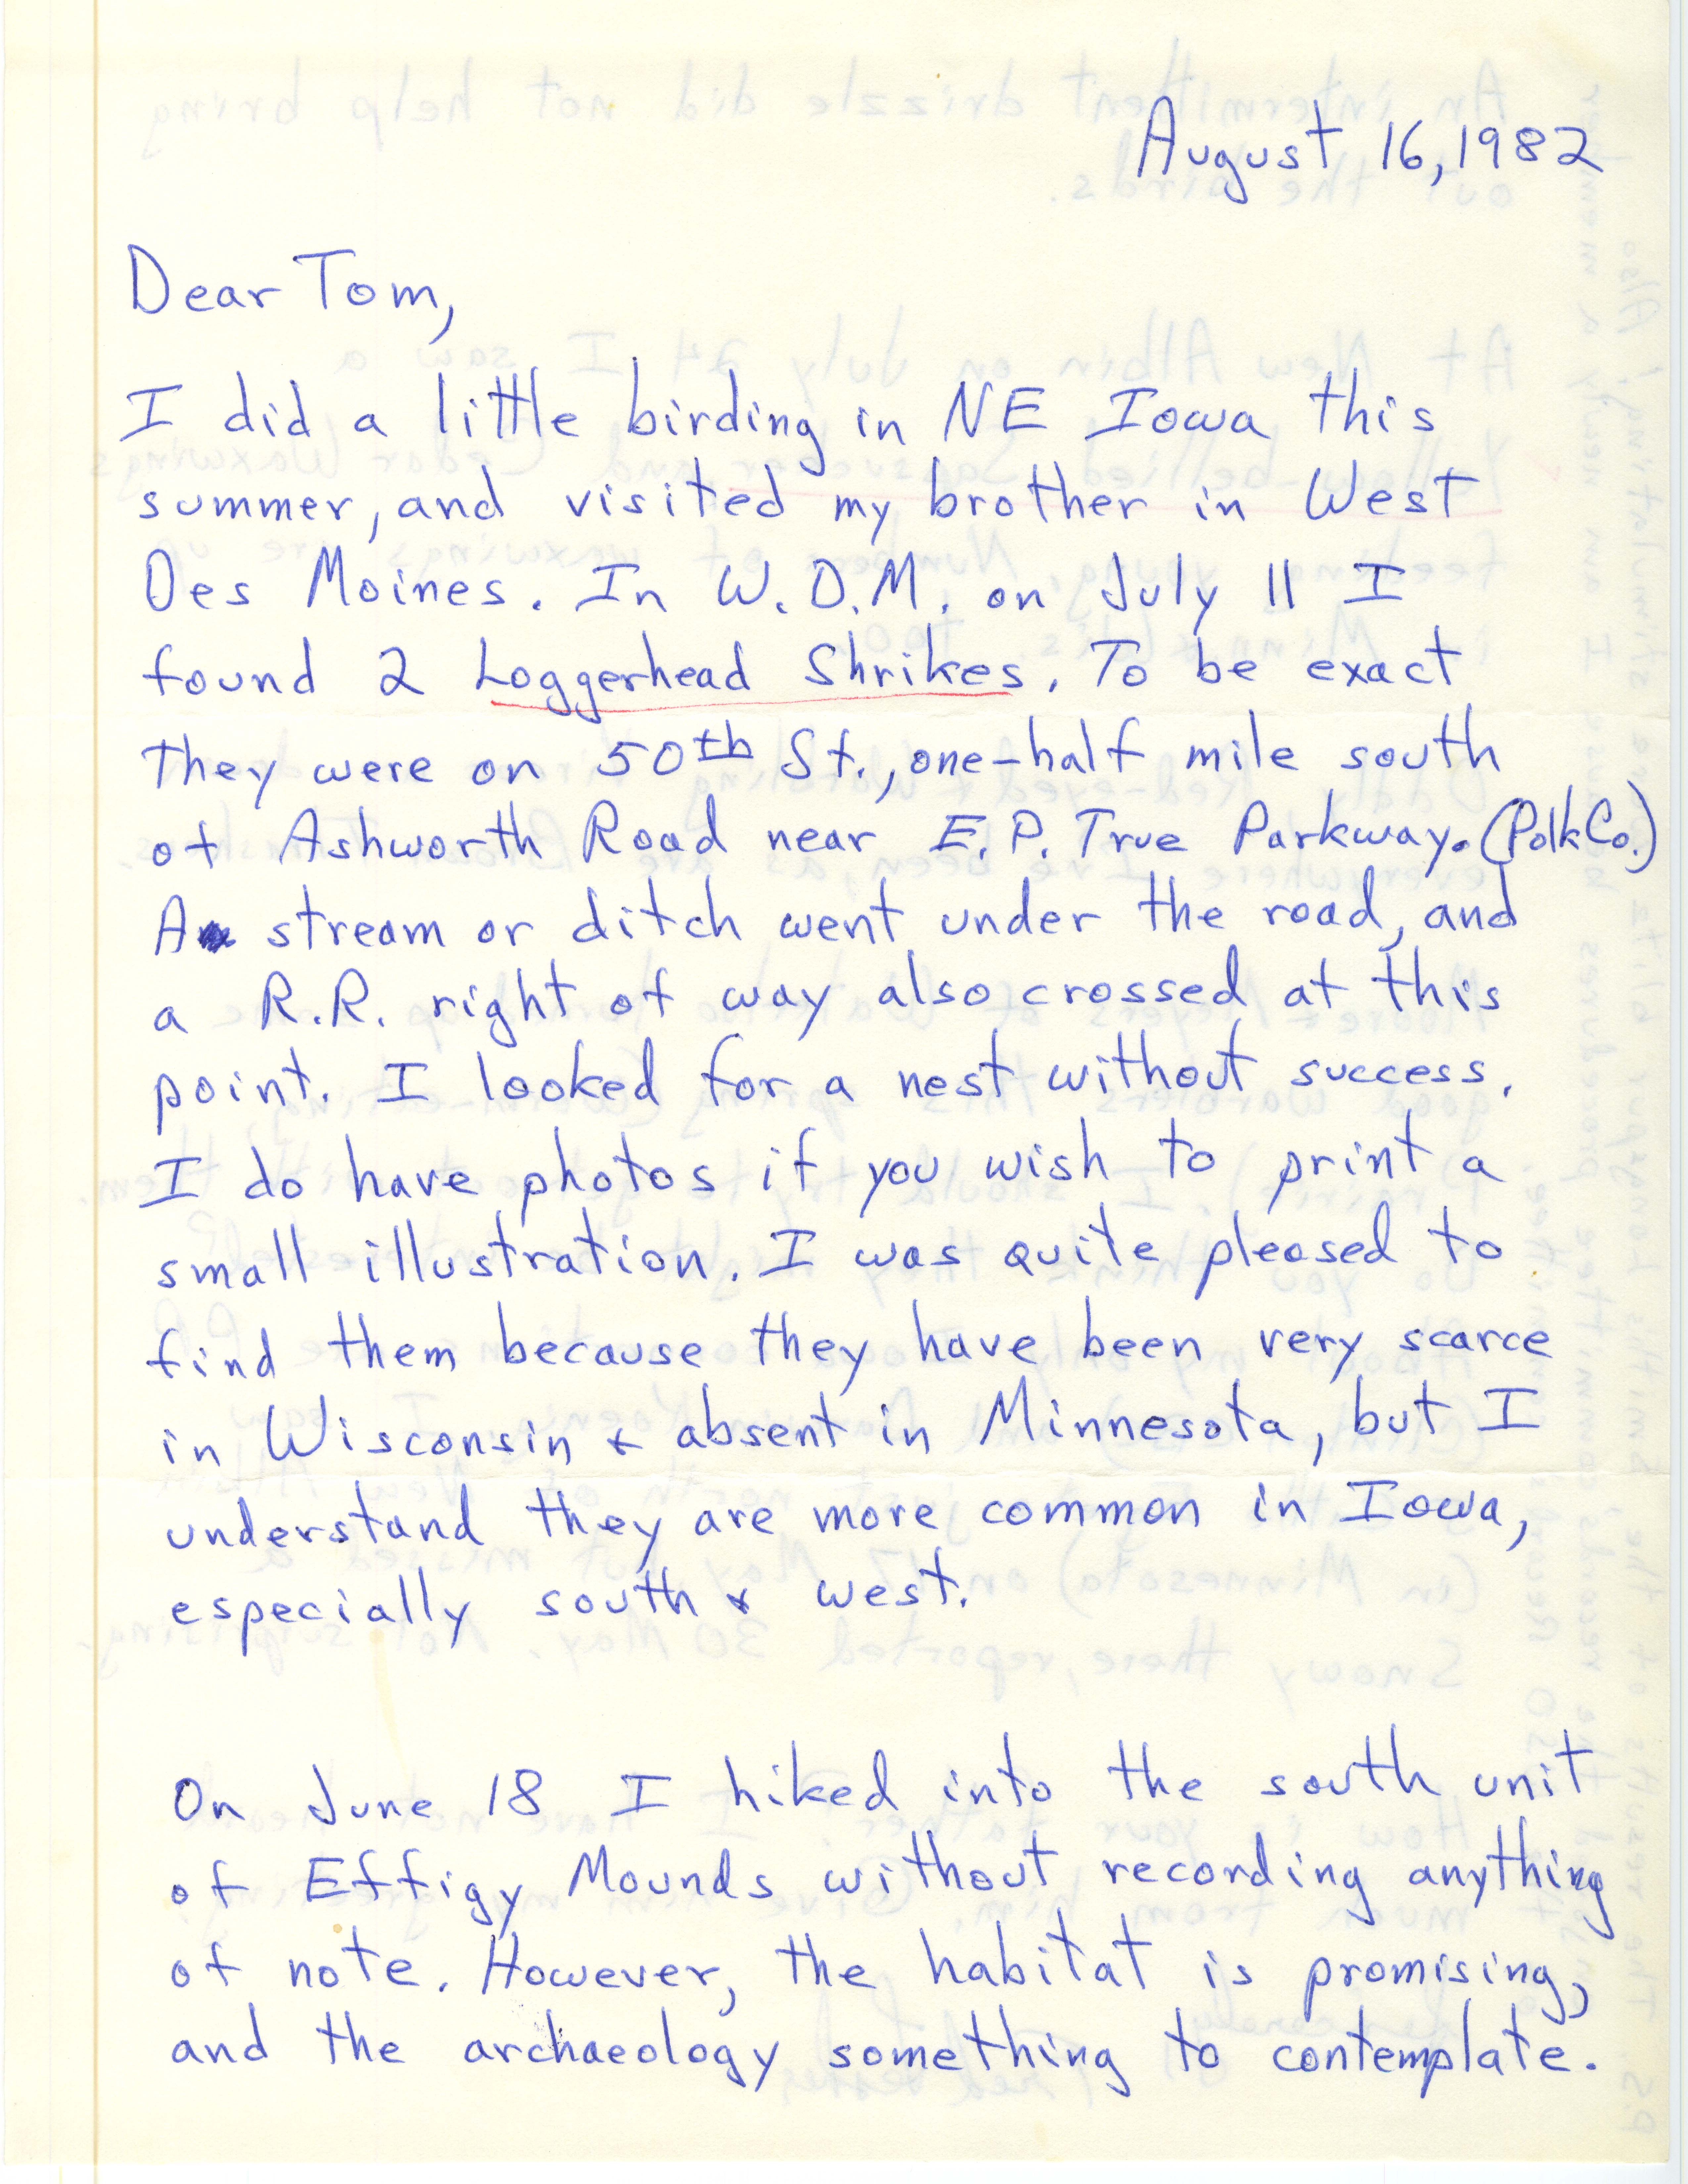 Fred Lesher letter to Thomas H. Kent regarding bird sightings in West Des Moines, Iowa, August 16, 1982